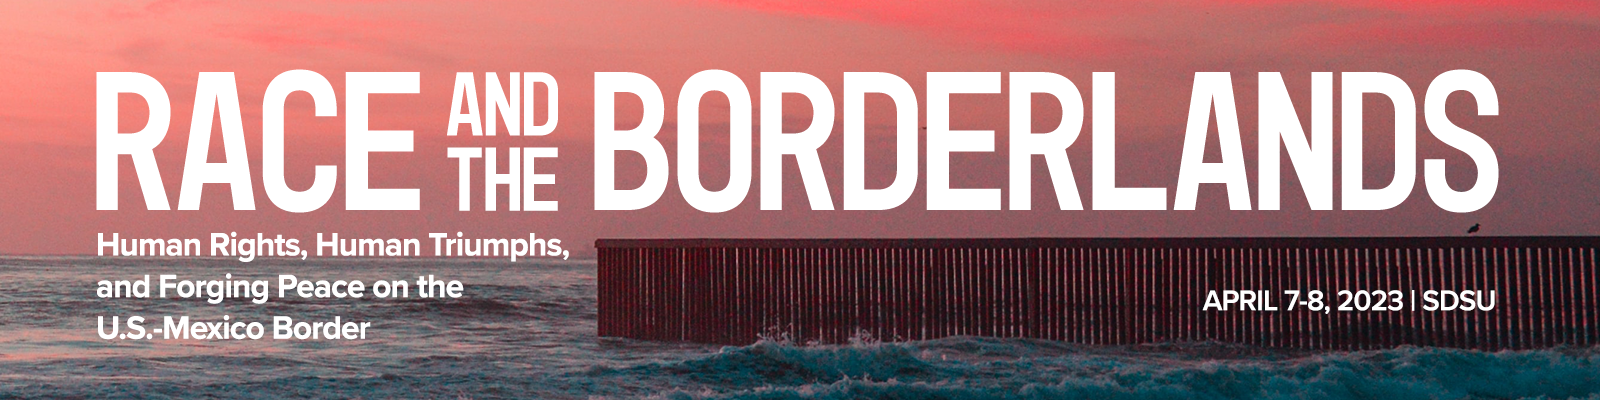 Race and the Borderlands: Human Rights, Human Triumphs, and Forging Peace on the U.S.-Mexico Border, April 7-8, 2023, SDSU